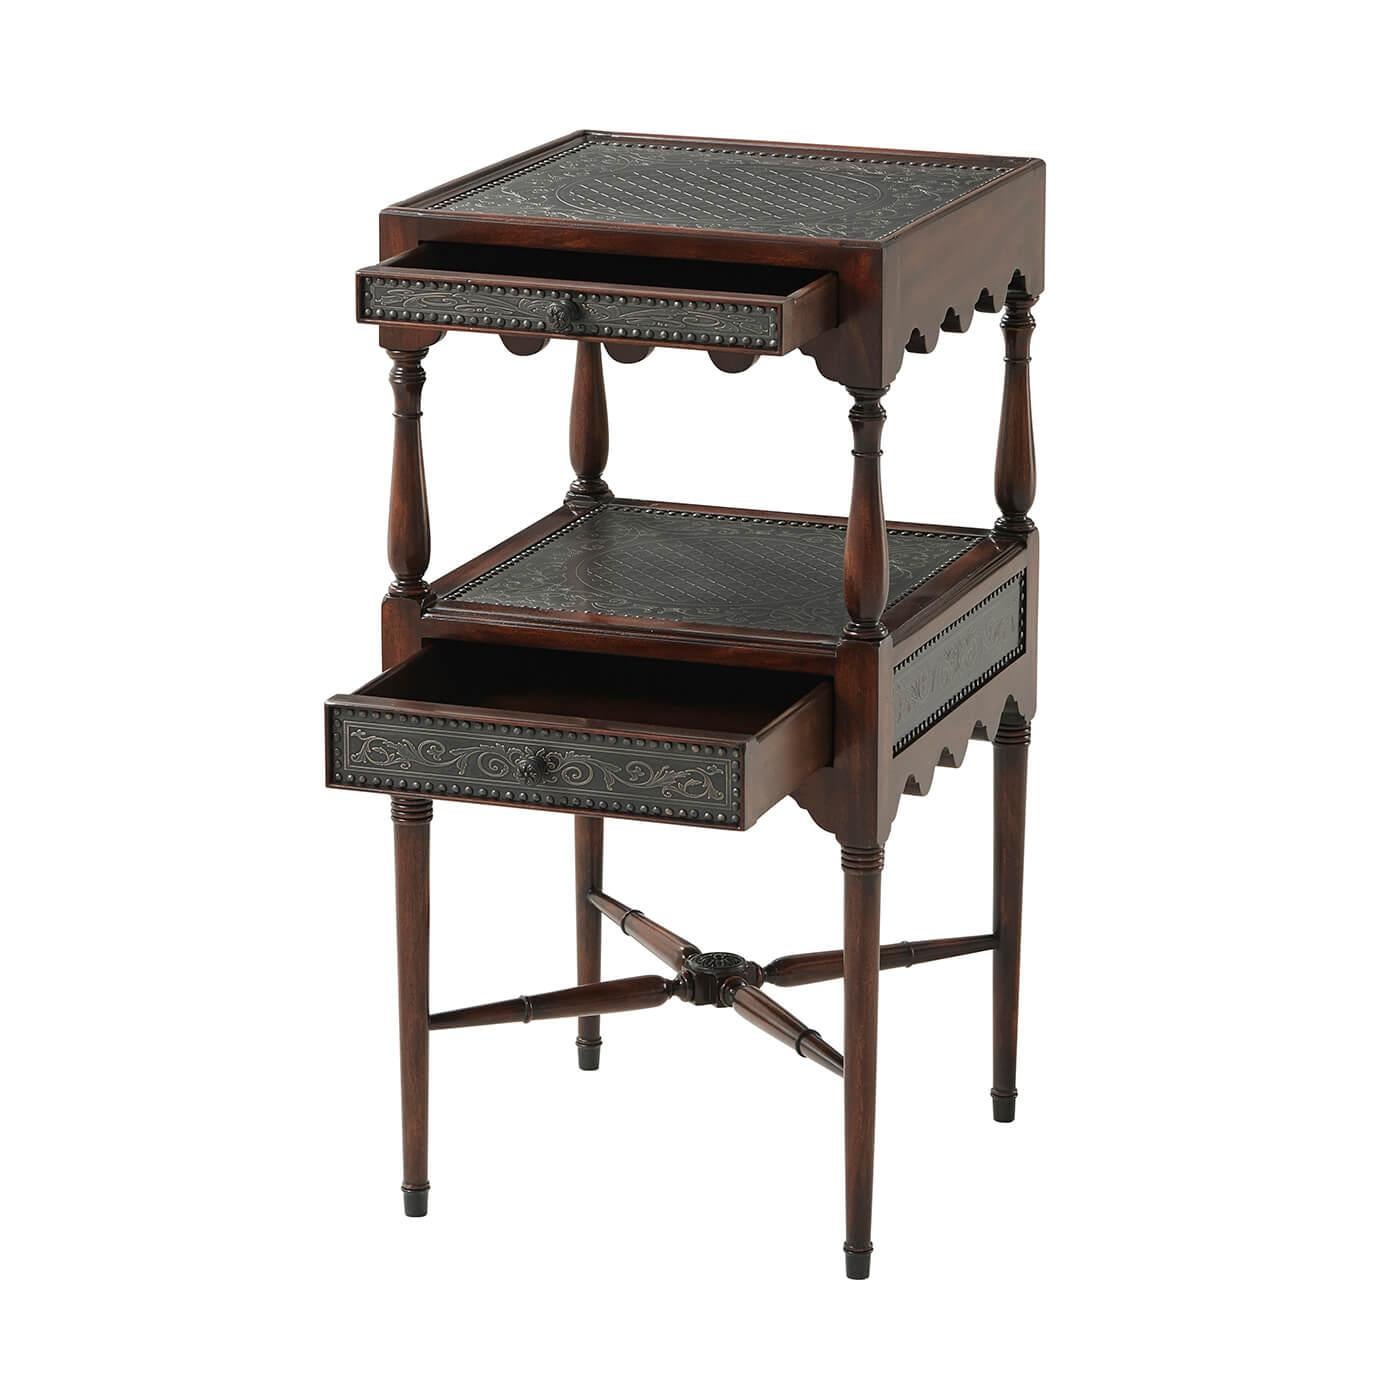 A Regency style solid two tier side table with engraved brass decoration, the top and under tier with floral frame lattice work cartouches to the panels and each fitted with a frieze drawer, between turned supports and with undulating aprons, on